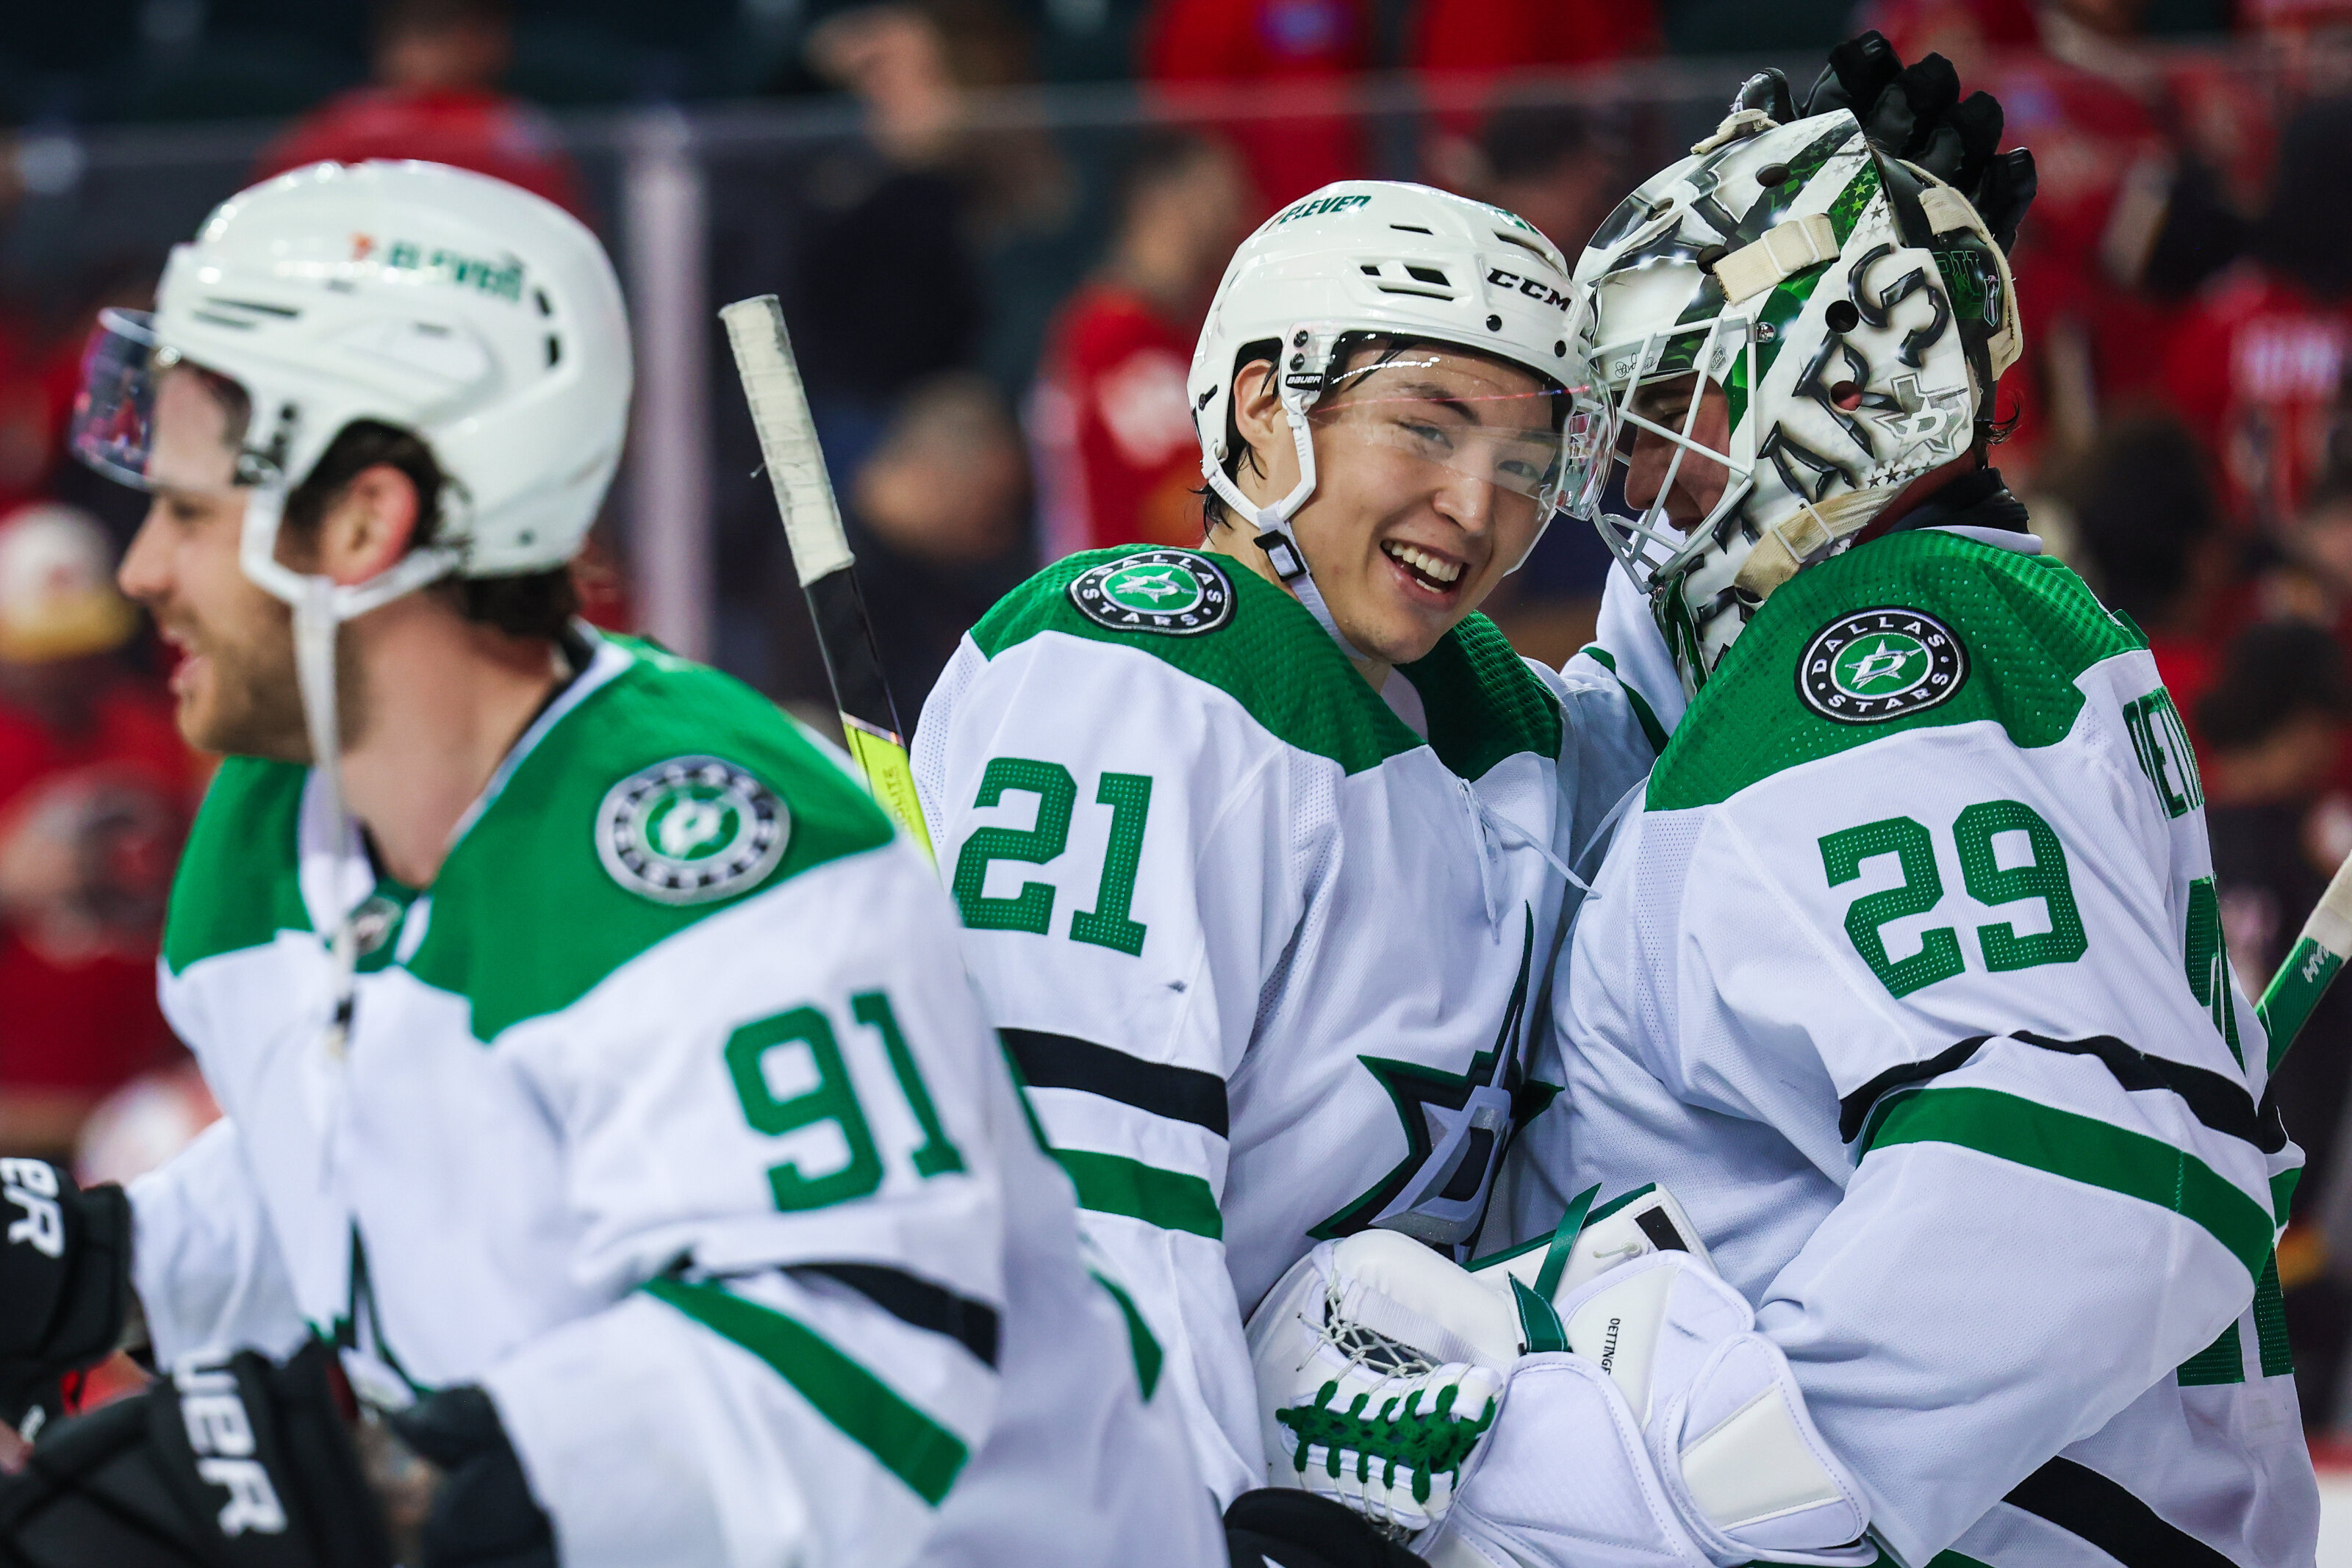 Otter' is staying in Dallas 👀 The Stars have signed goaltender